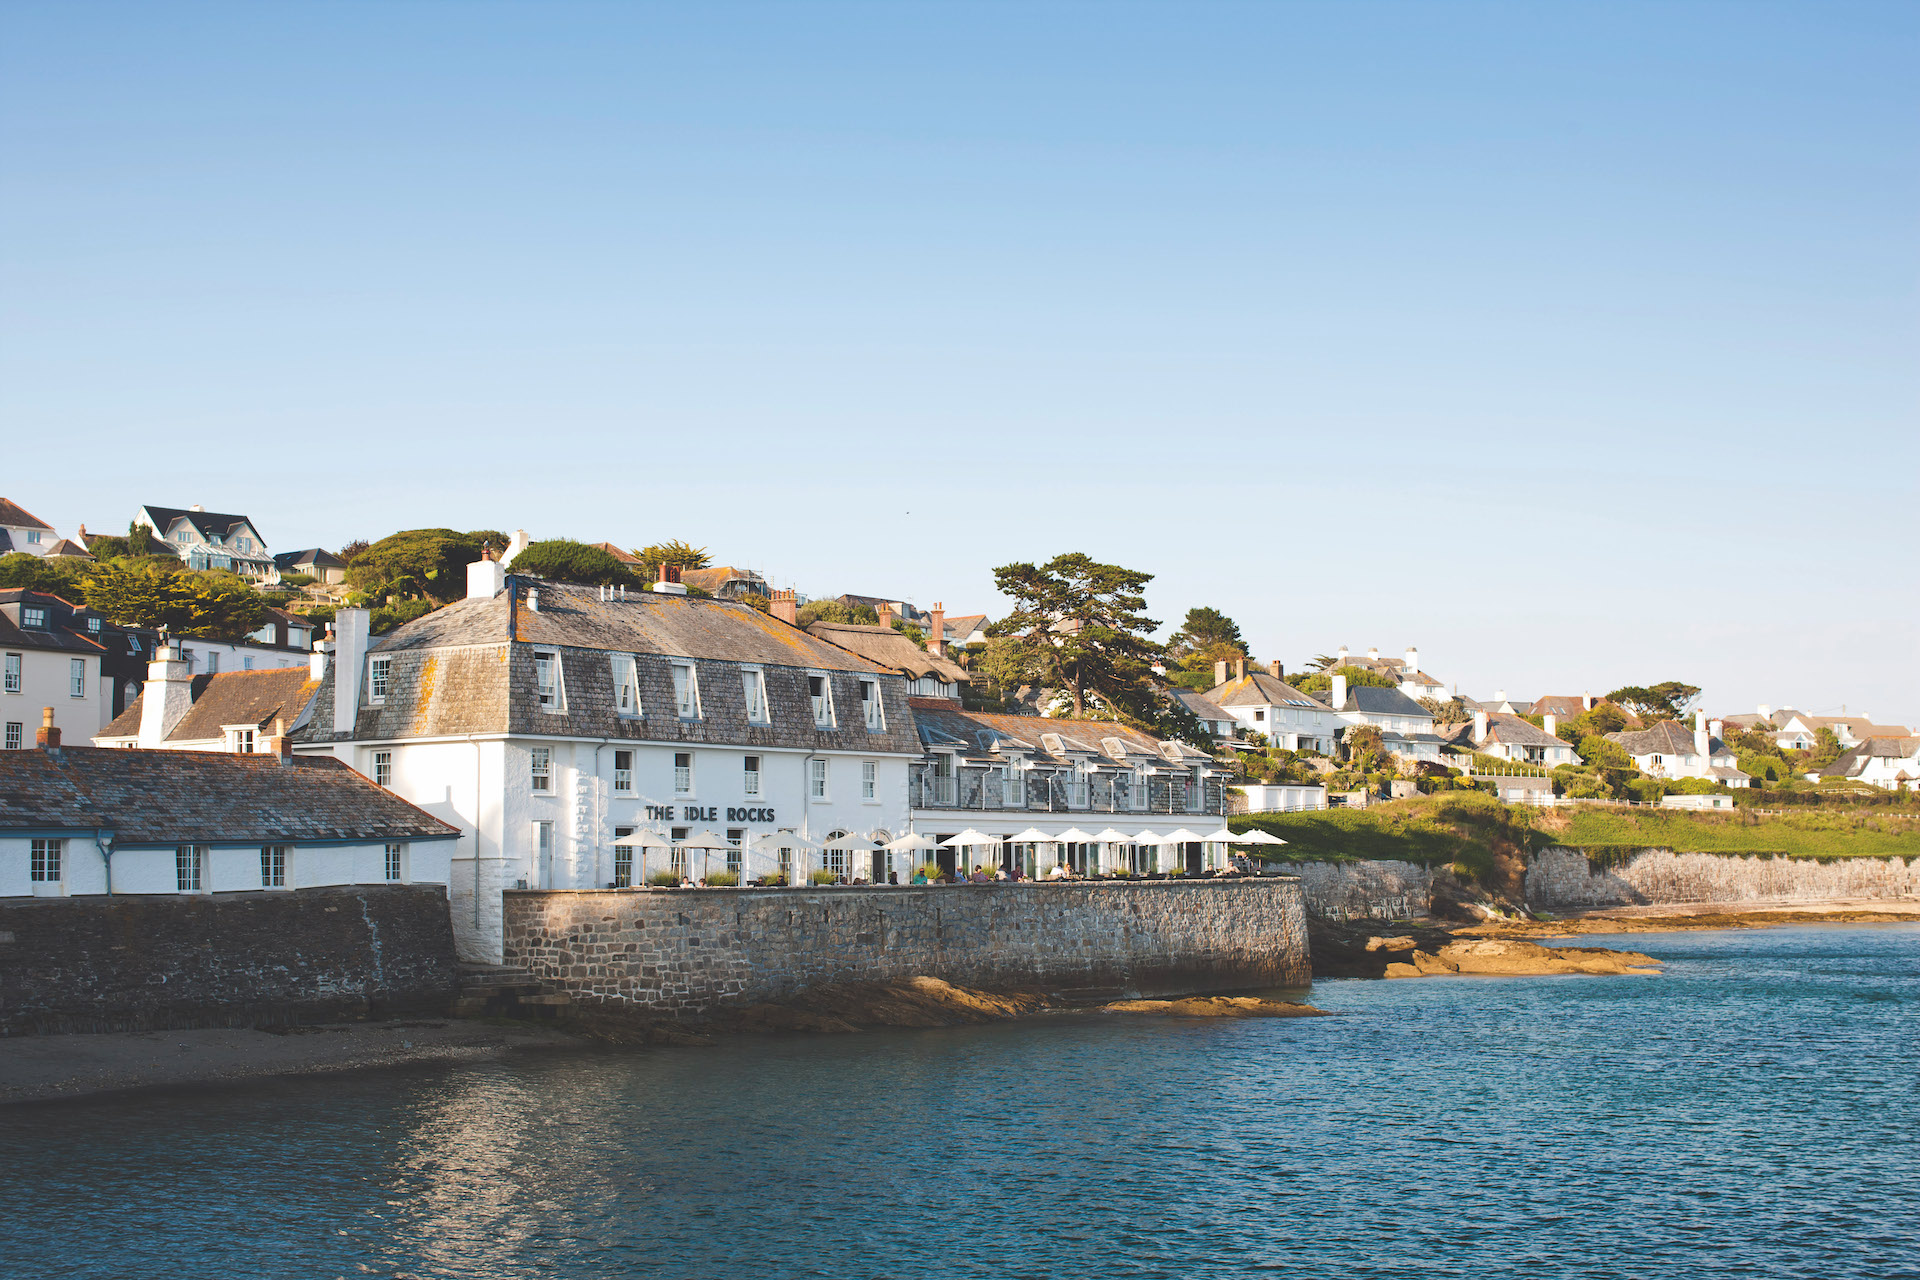 review:-a-slow-travel-trip-through-the-south-west-with-relais-&-chateaux